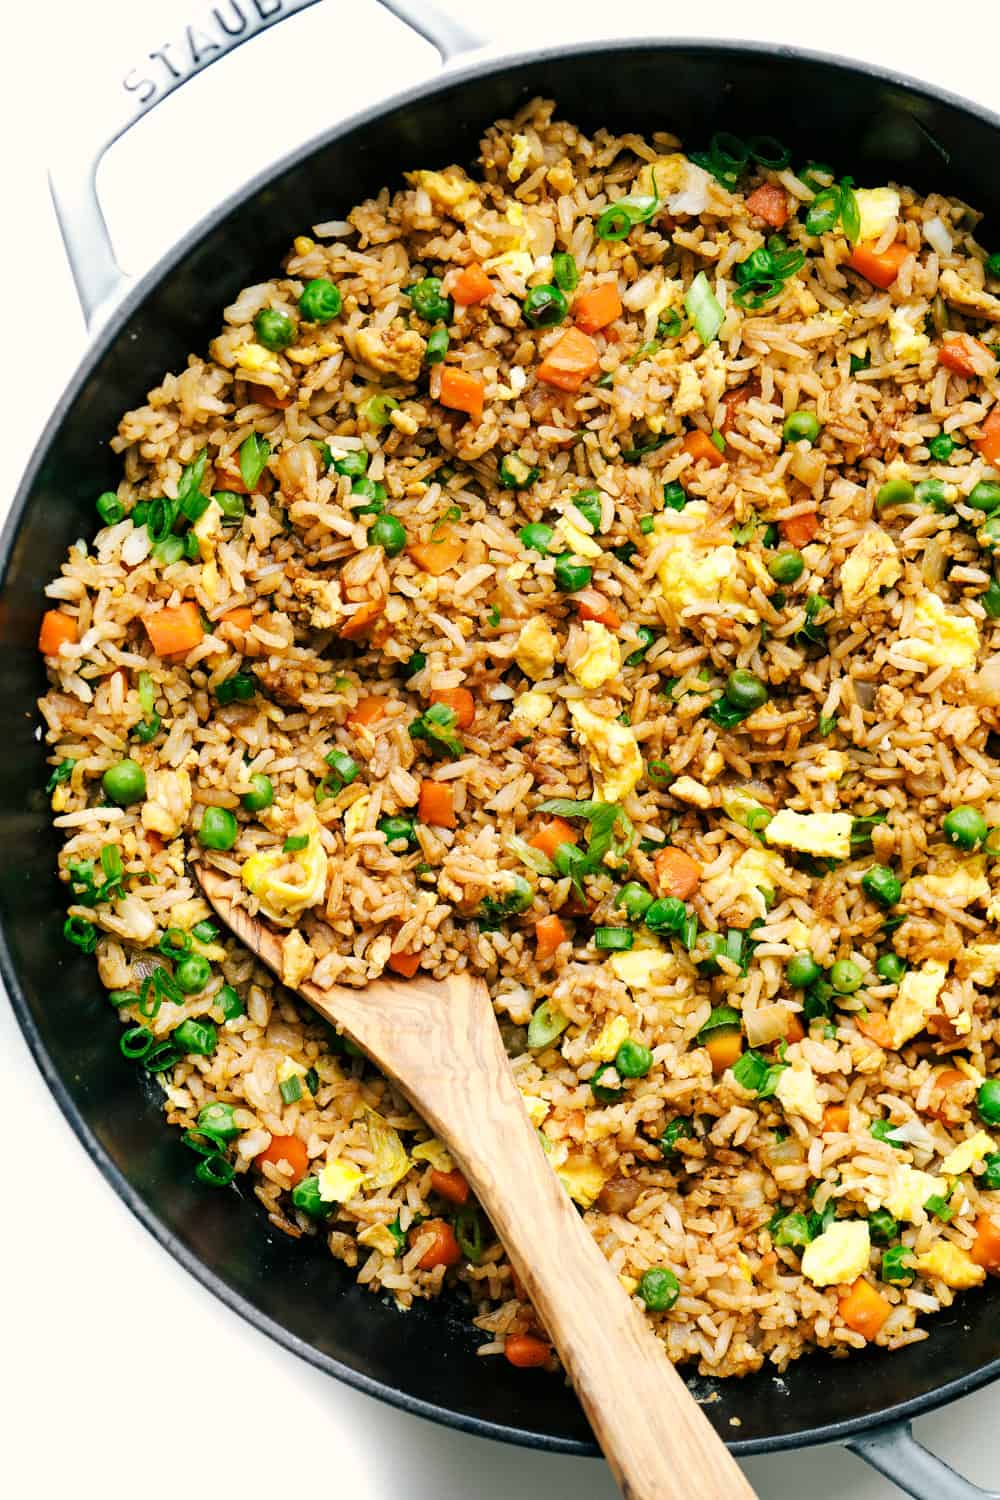 Tips for Making Fried Rice